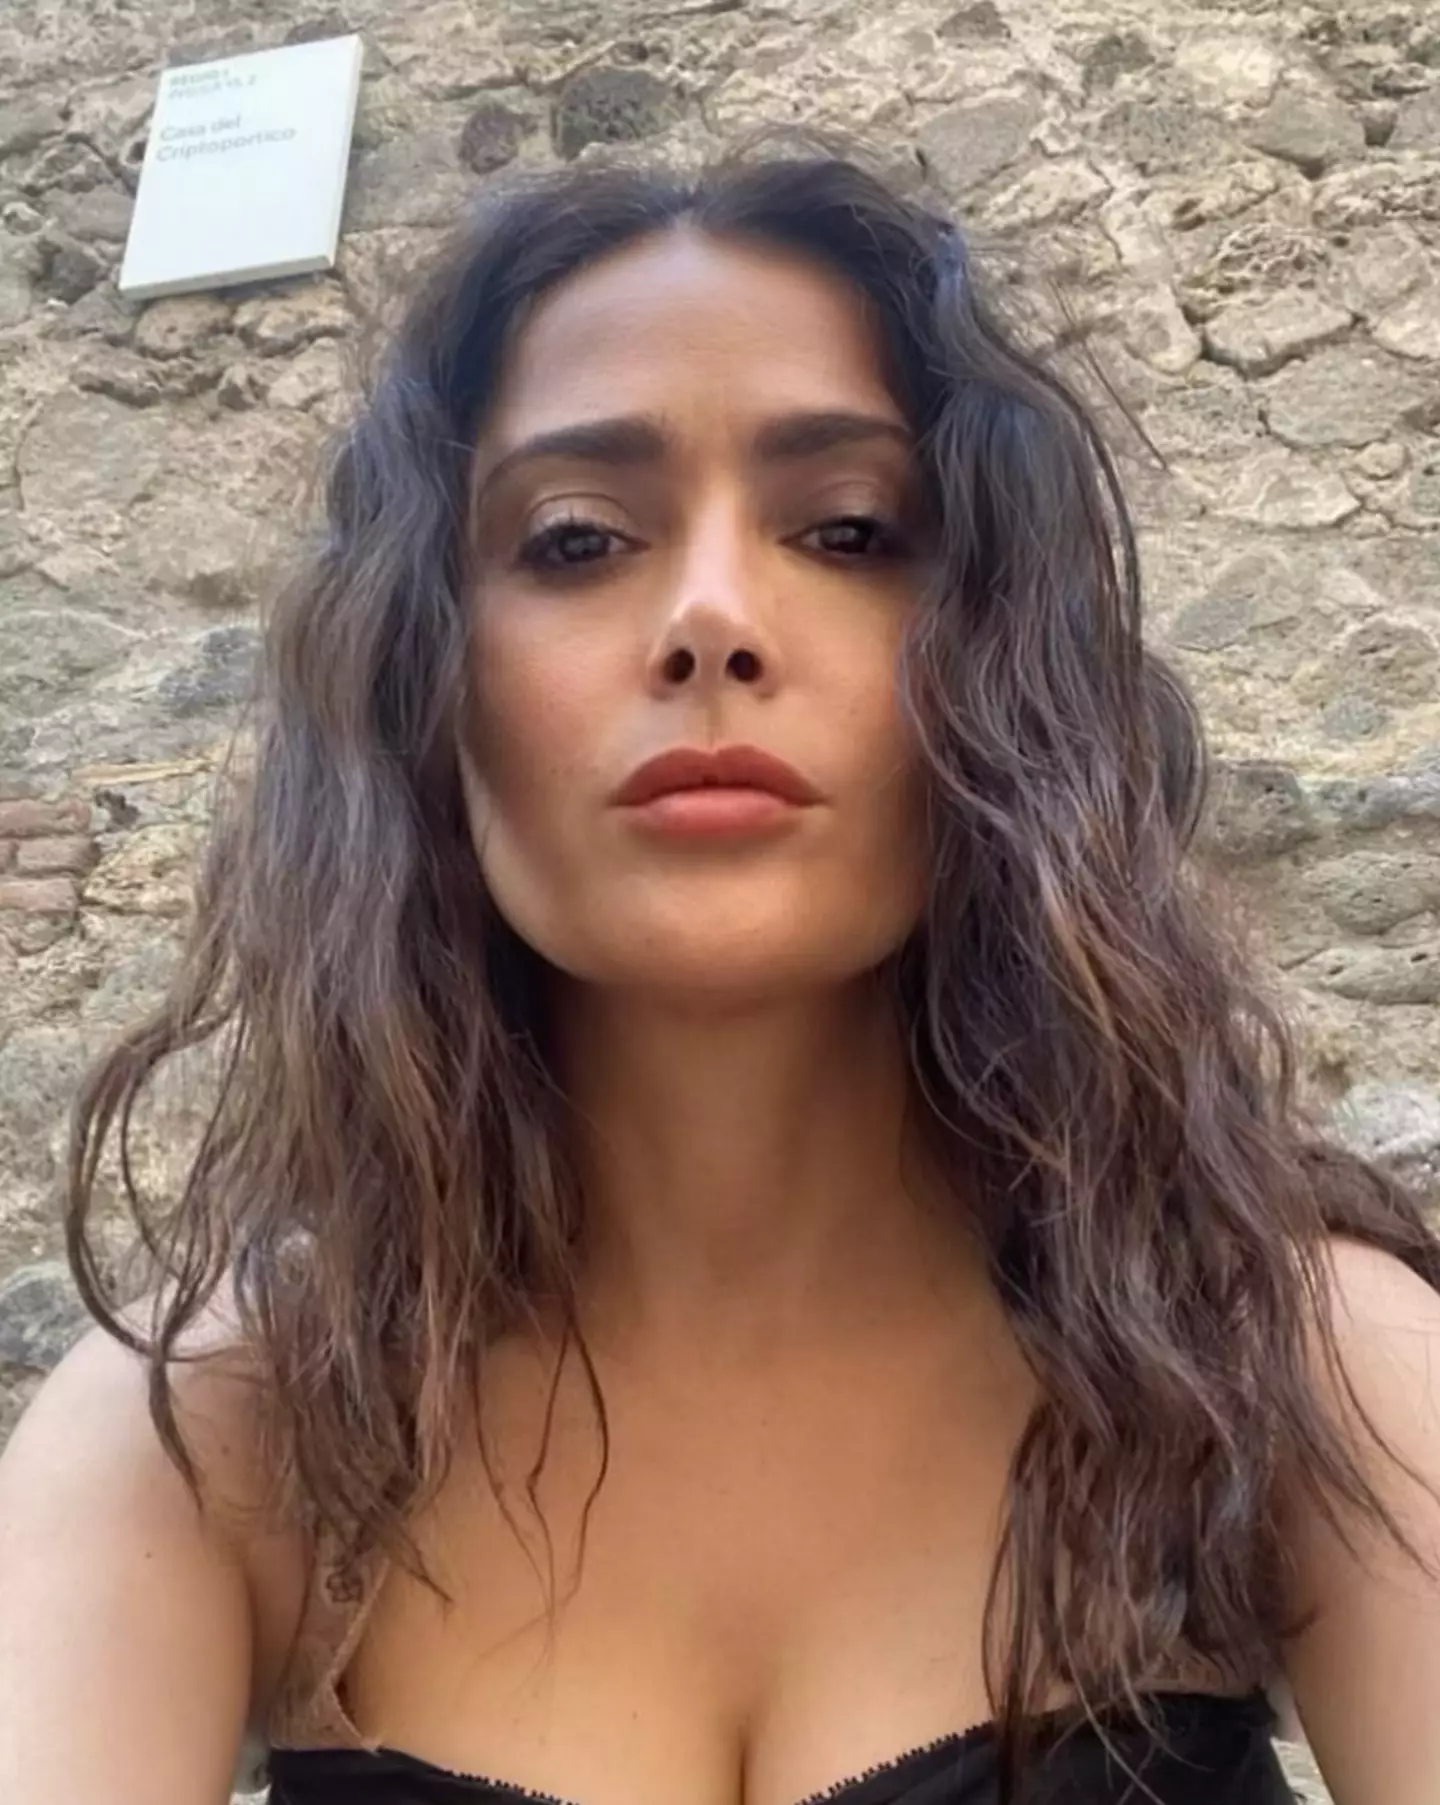 Salma says her skincare hack was passed down to her from her grandmother.